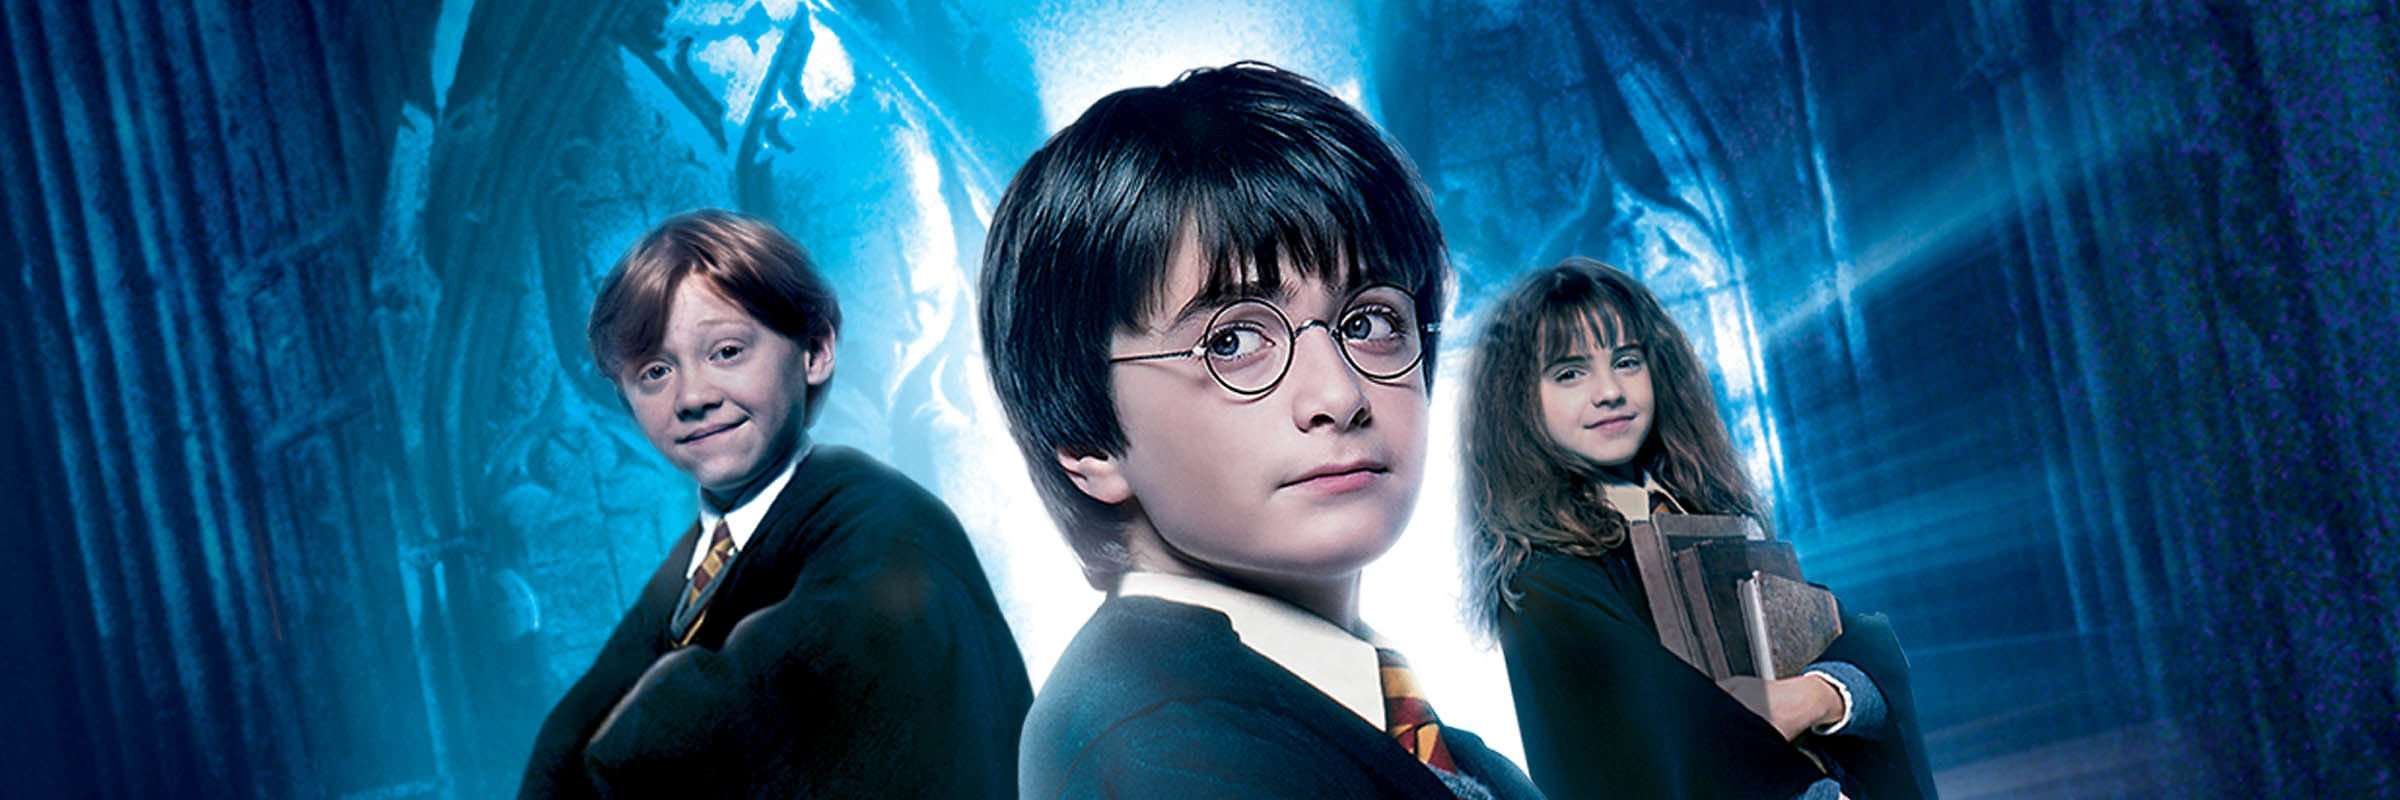 20 Reasons to Watch Harry Potter and the Sorcerer